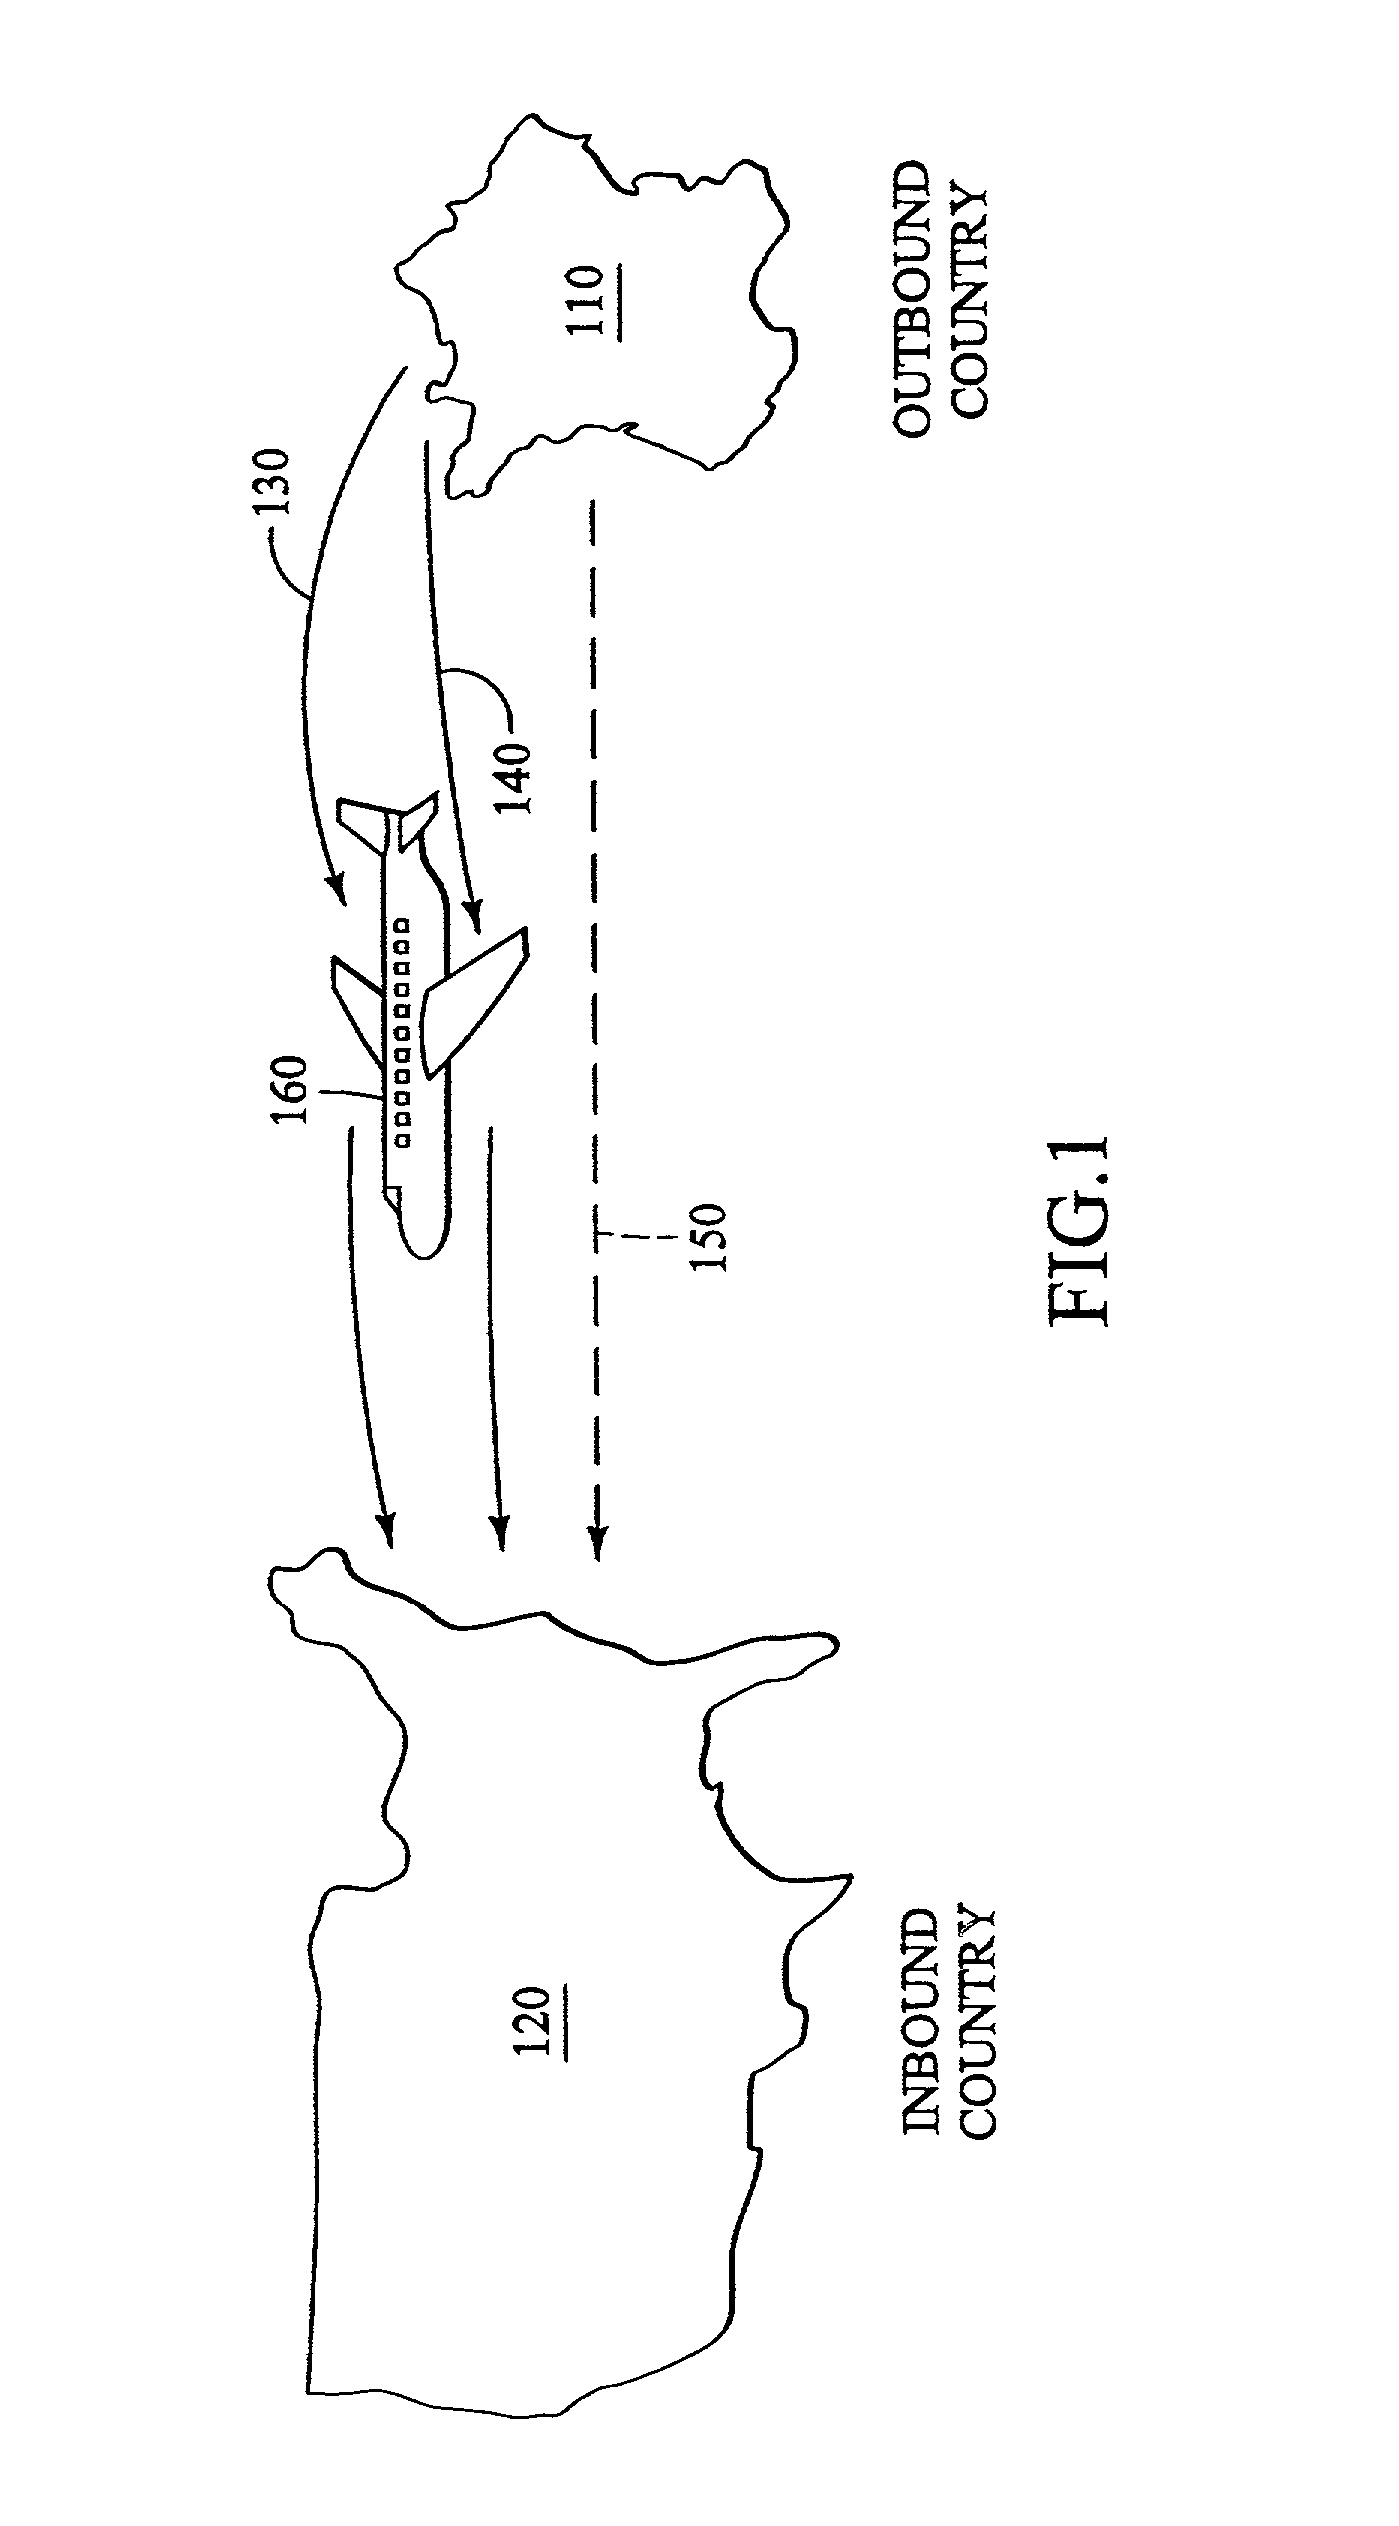 Method and apparatus for processing an international passenger